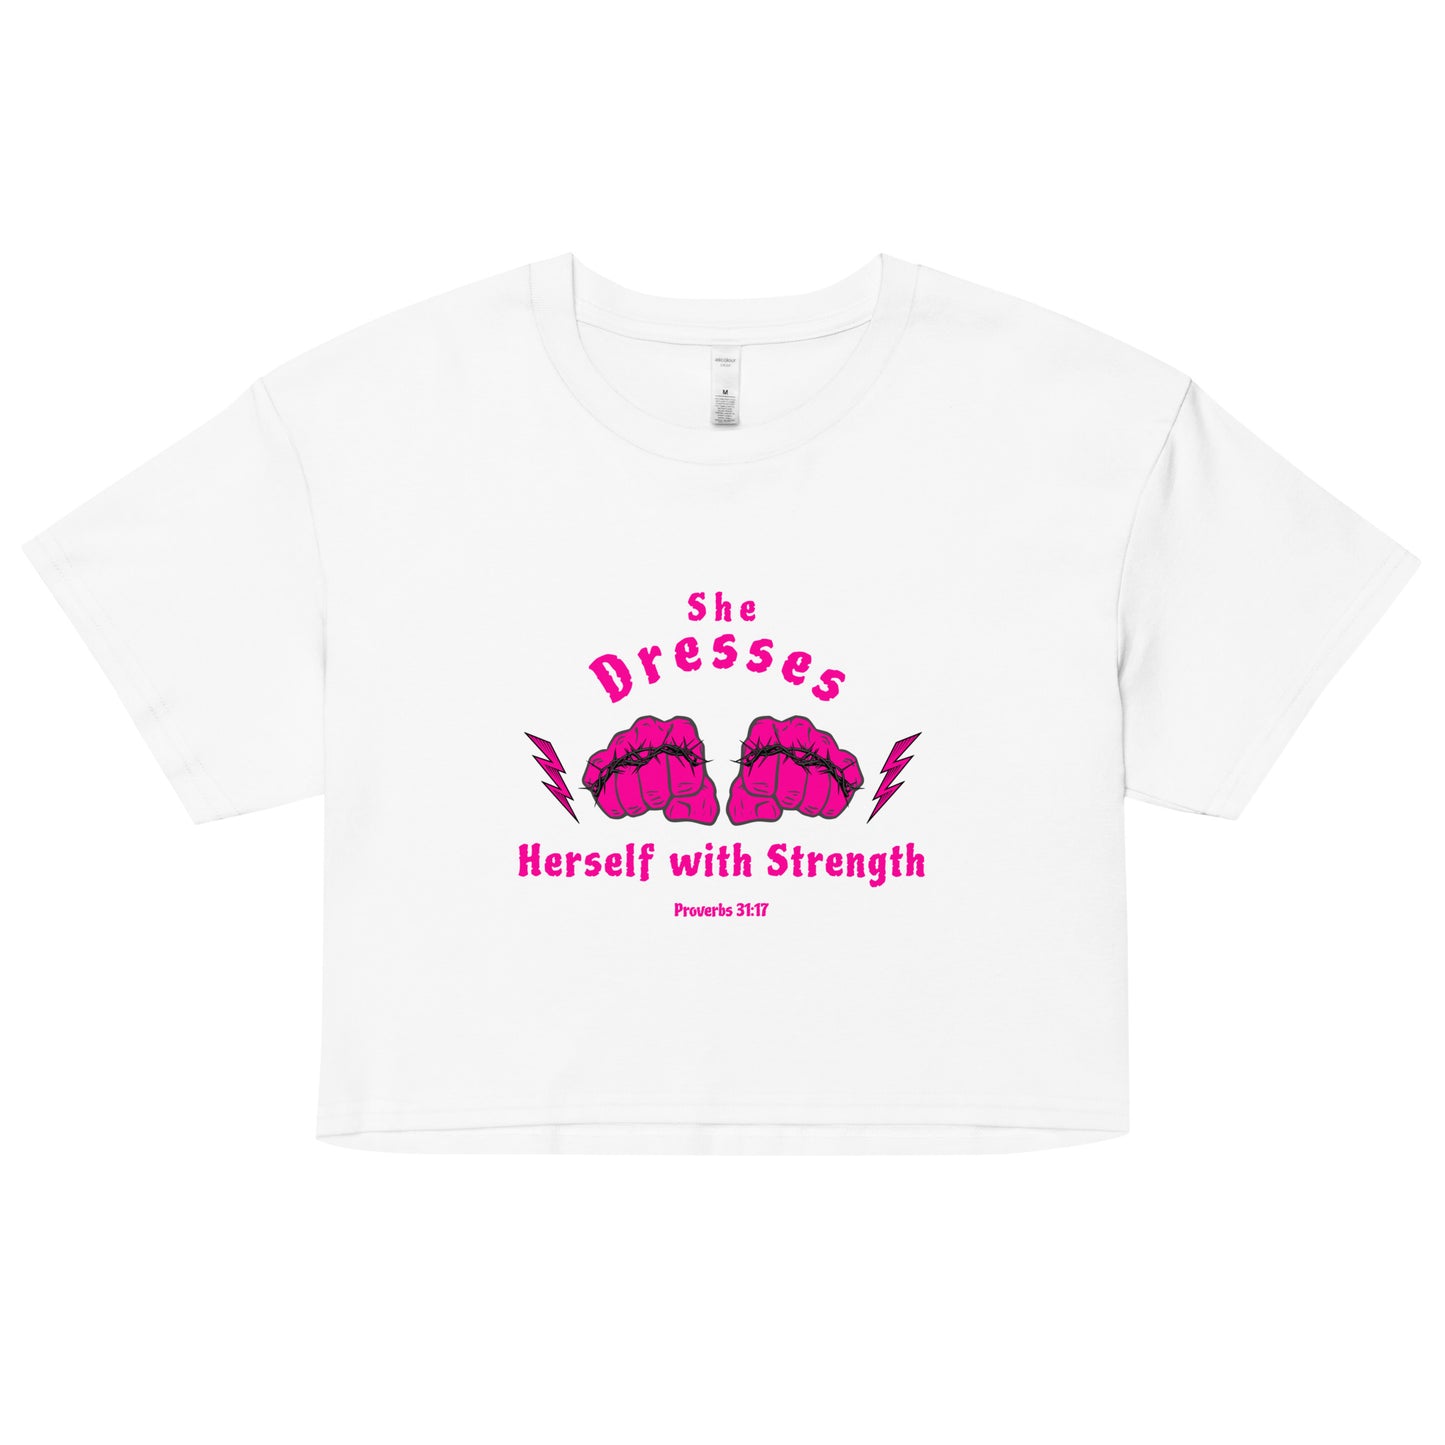 She Dresses Herself with Strength Women’s crop top